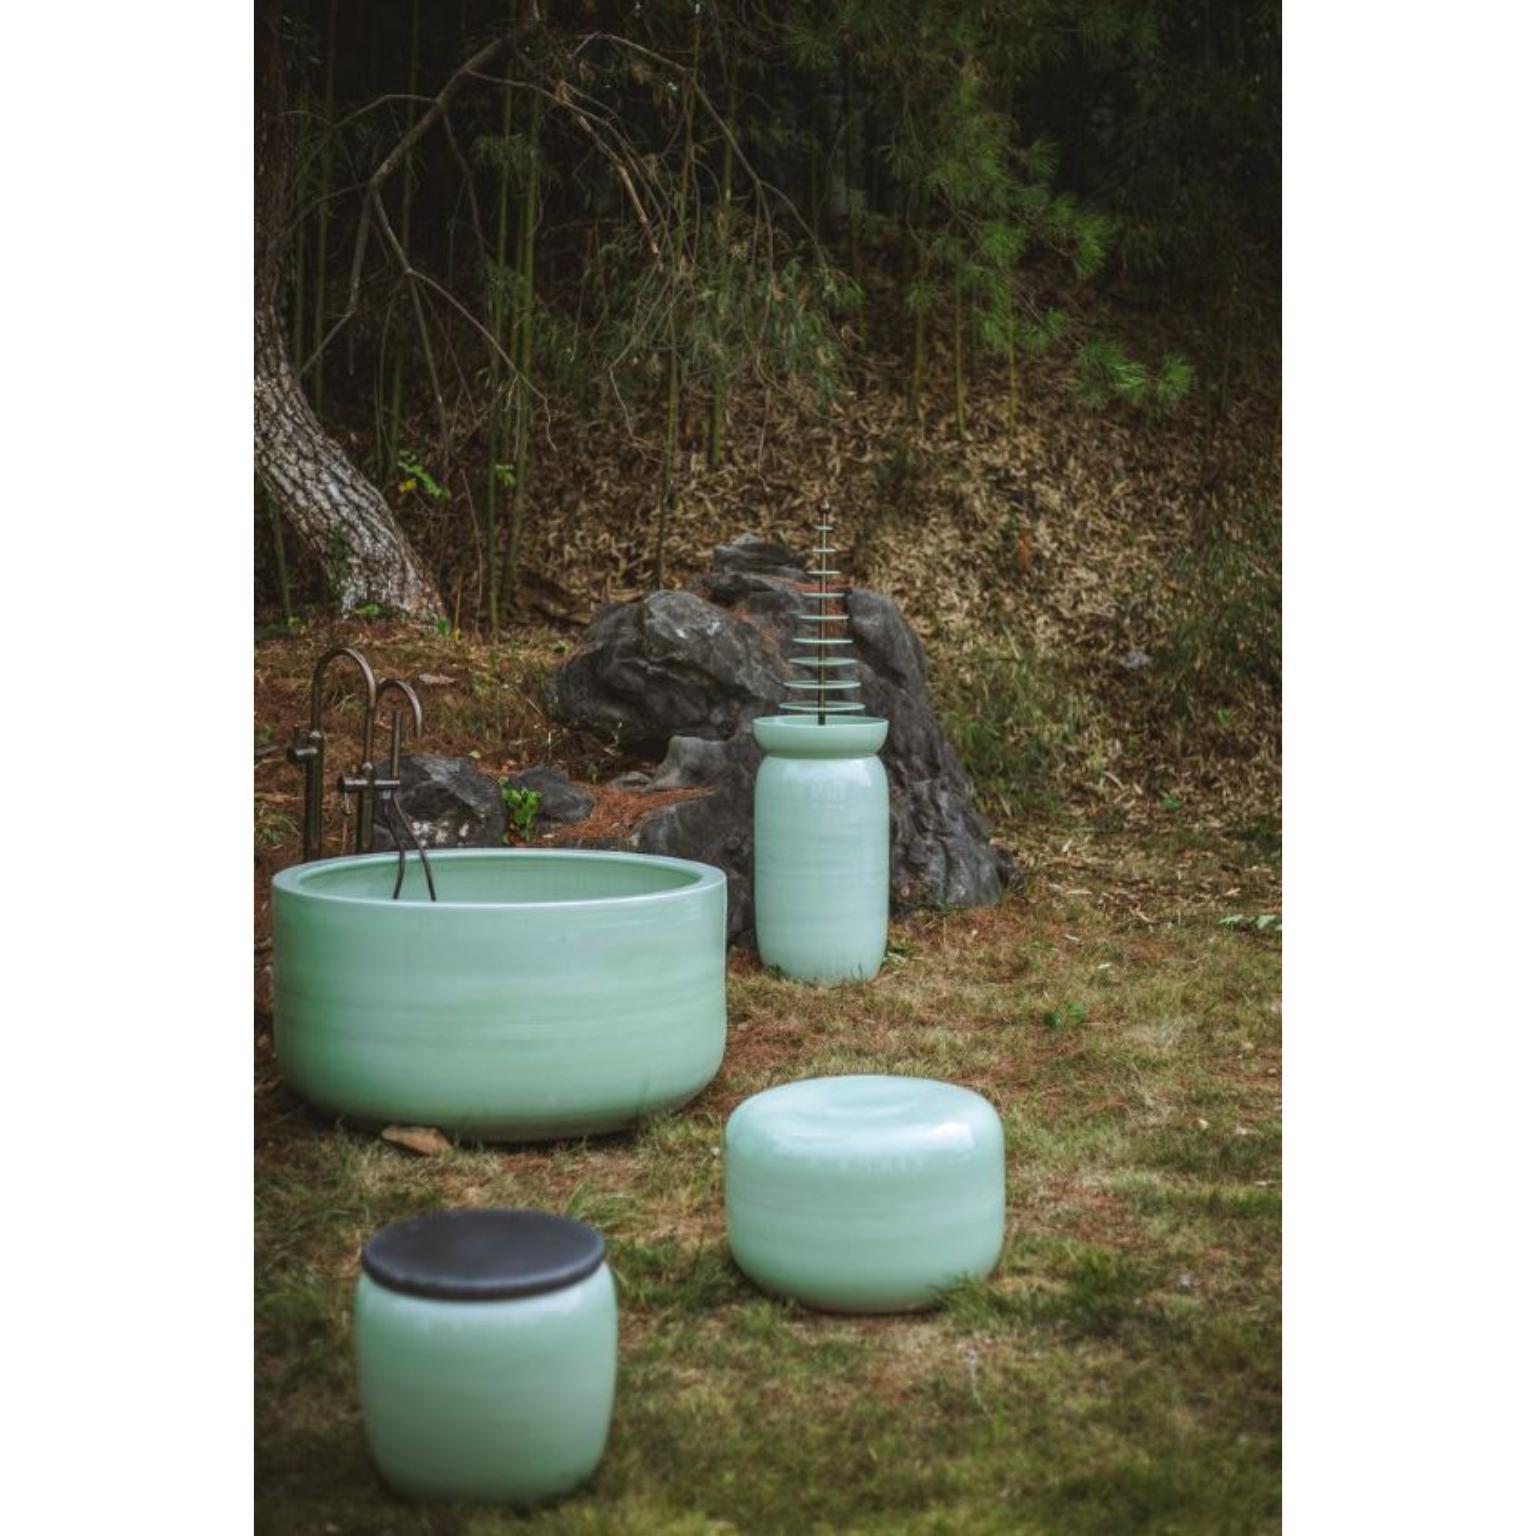 Aqua Botanica Step stool by WL Ceramics
Designer: Edward van Vliet
Materials: Porcelain
Dimensions: H36 x Ø56 cm


At WL CERAMICS we make porcelain with passion. We are a family run company based in Jingdezhen, China, the birthplace of porcelain